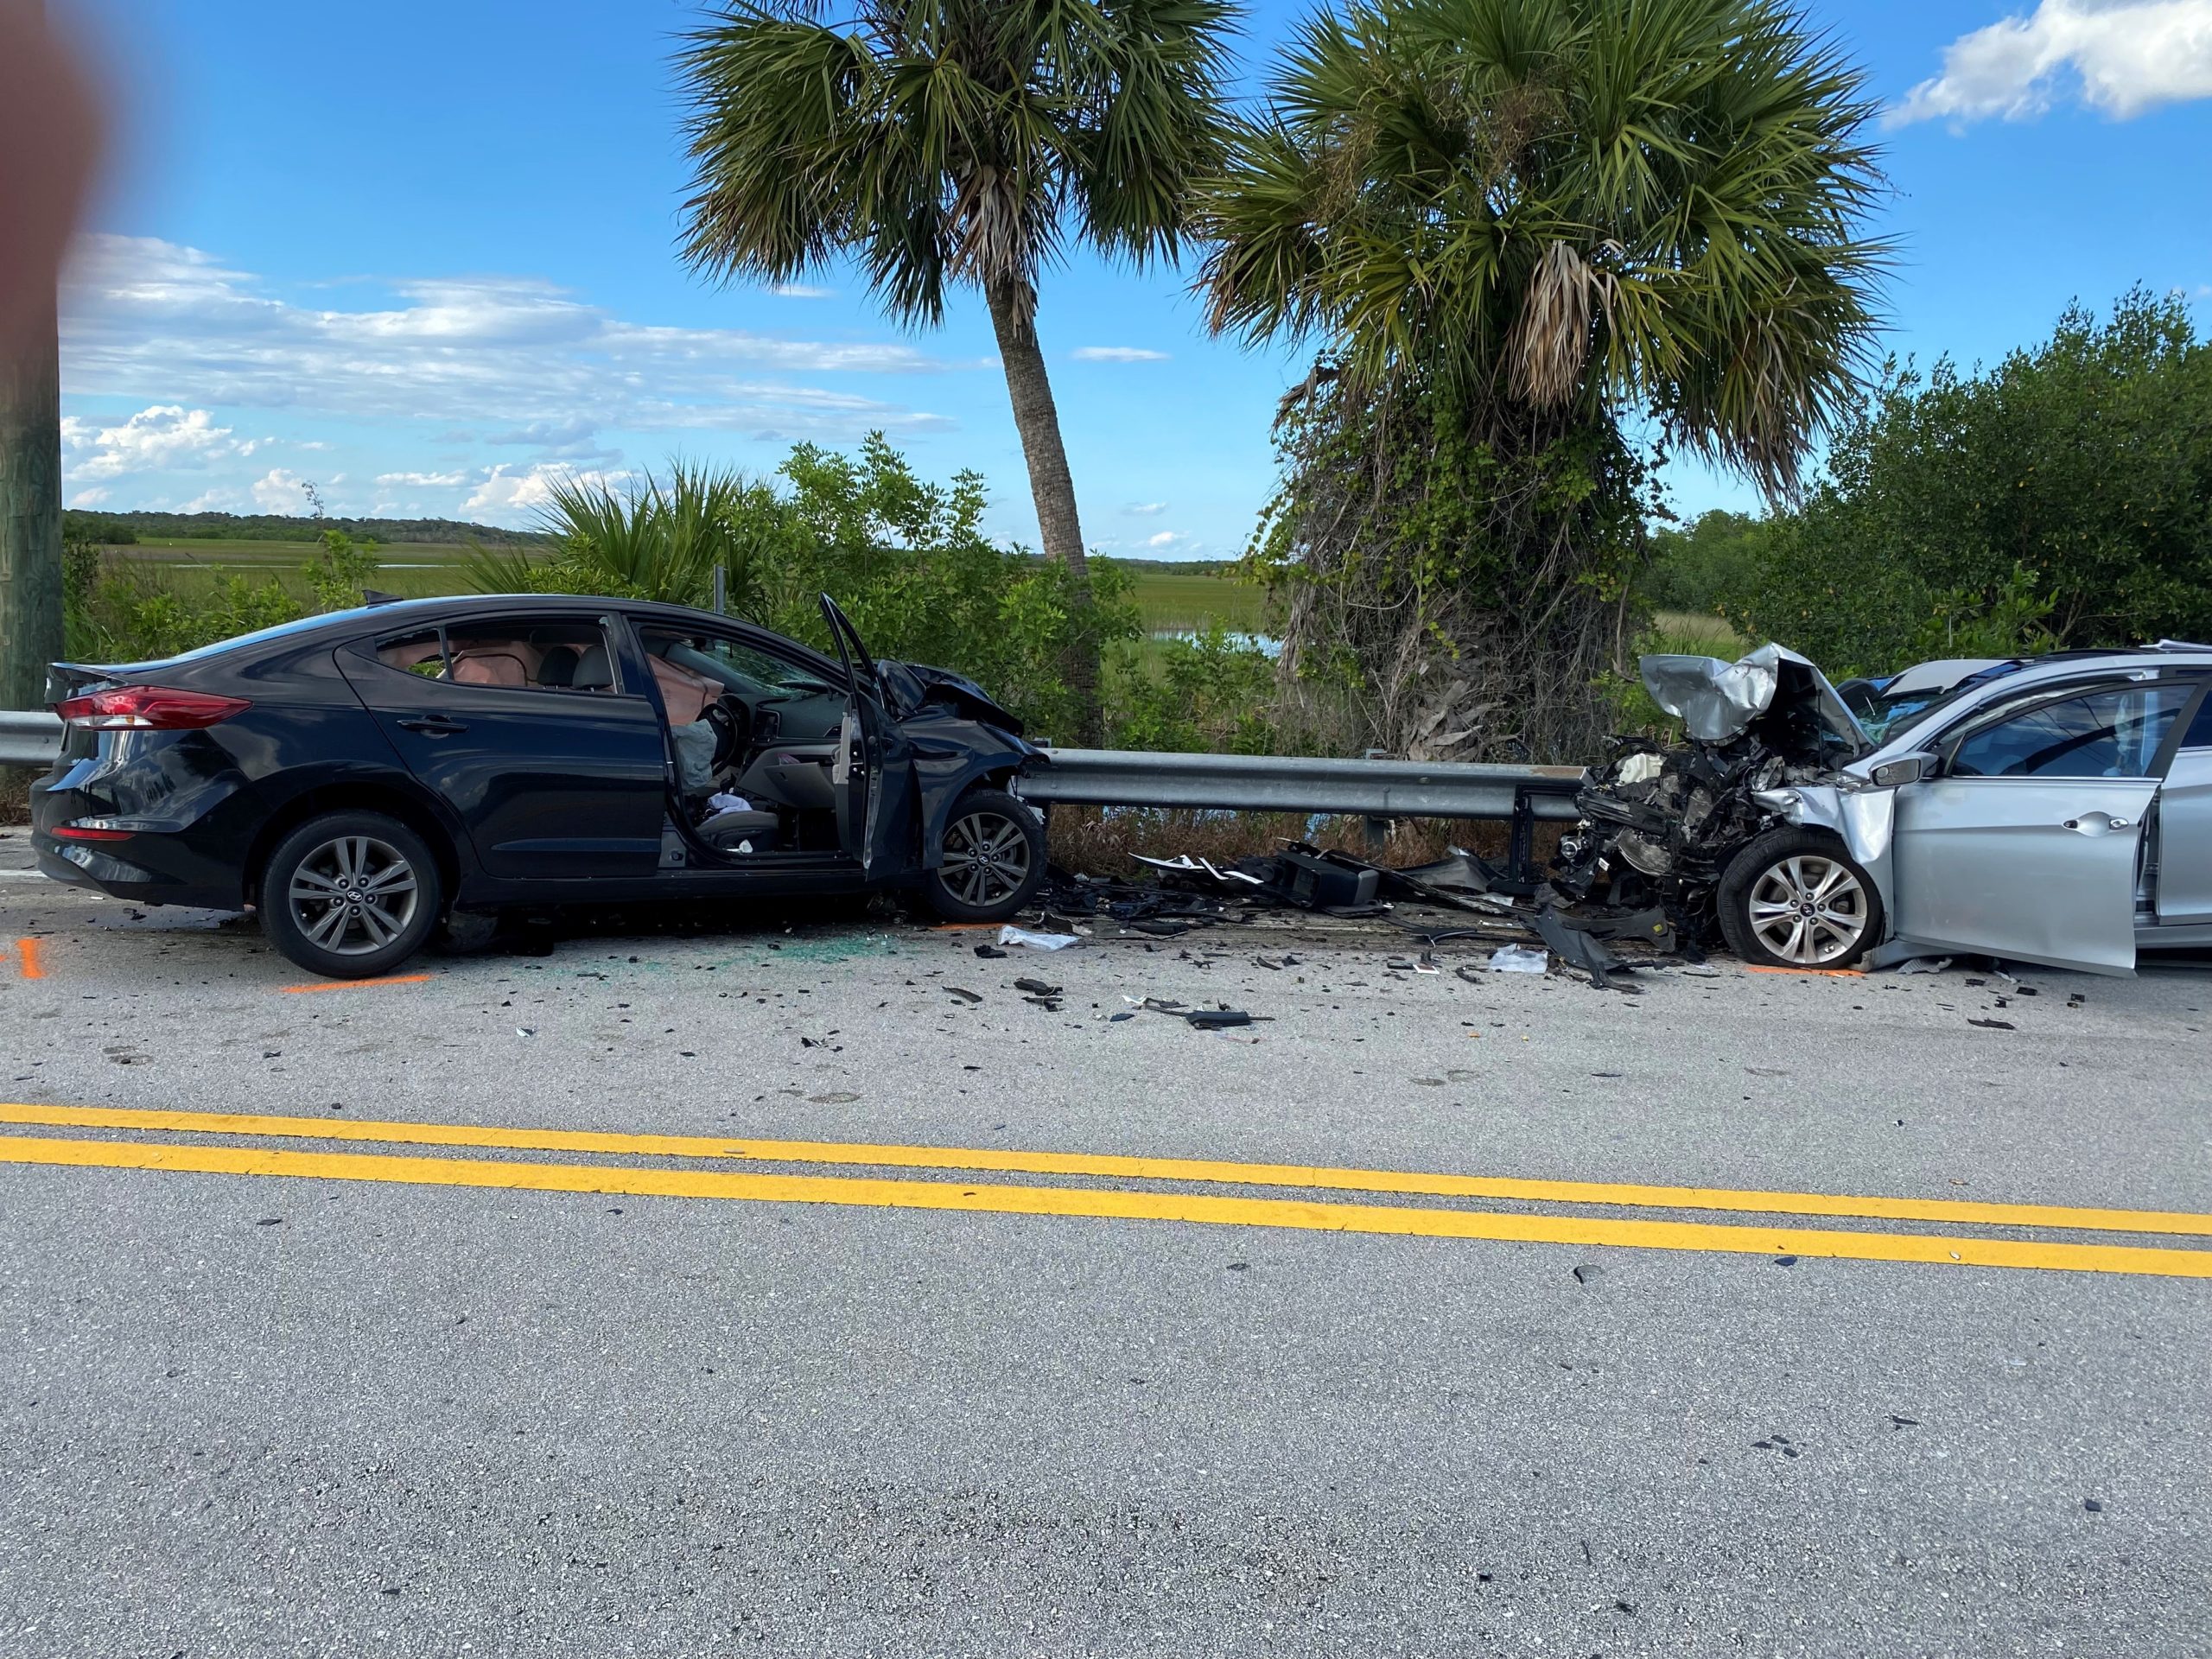 Police: 1 Florida teen killed, 2 seriously injured in crash of stolen car 